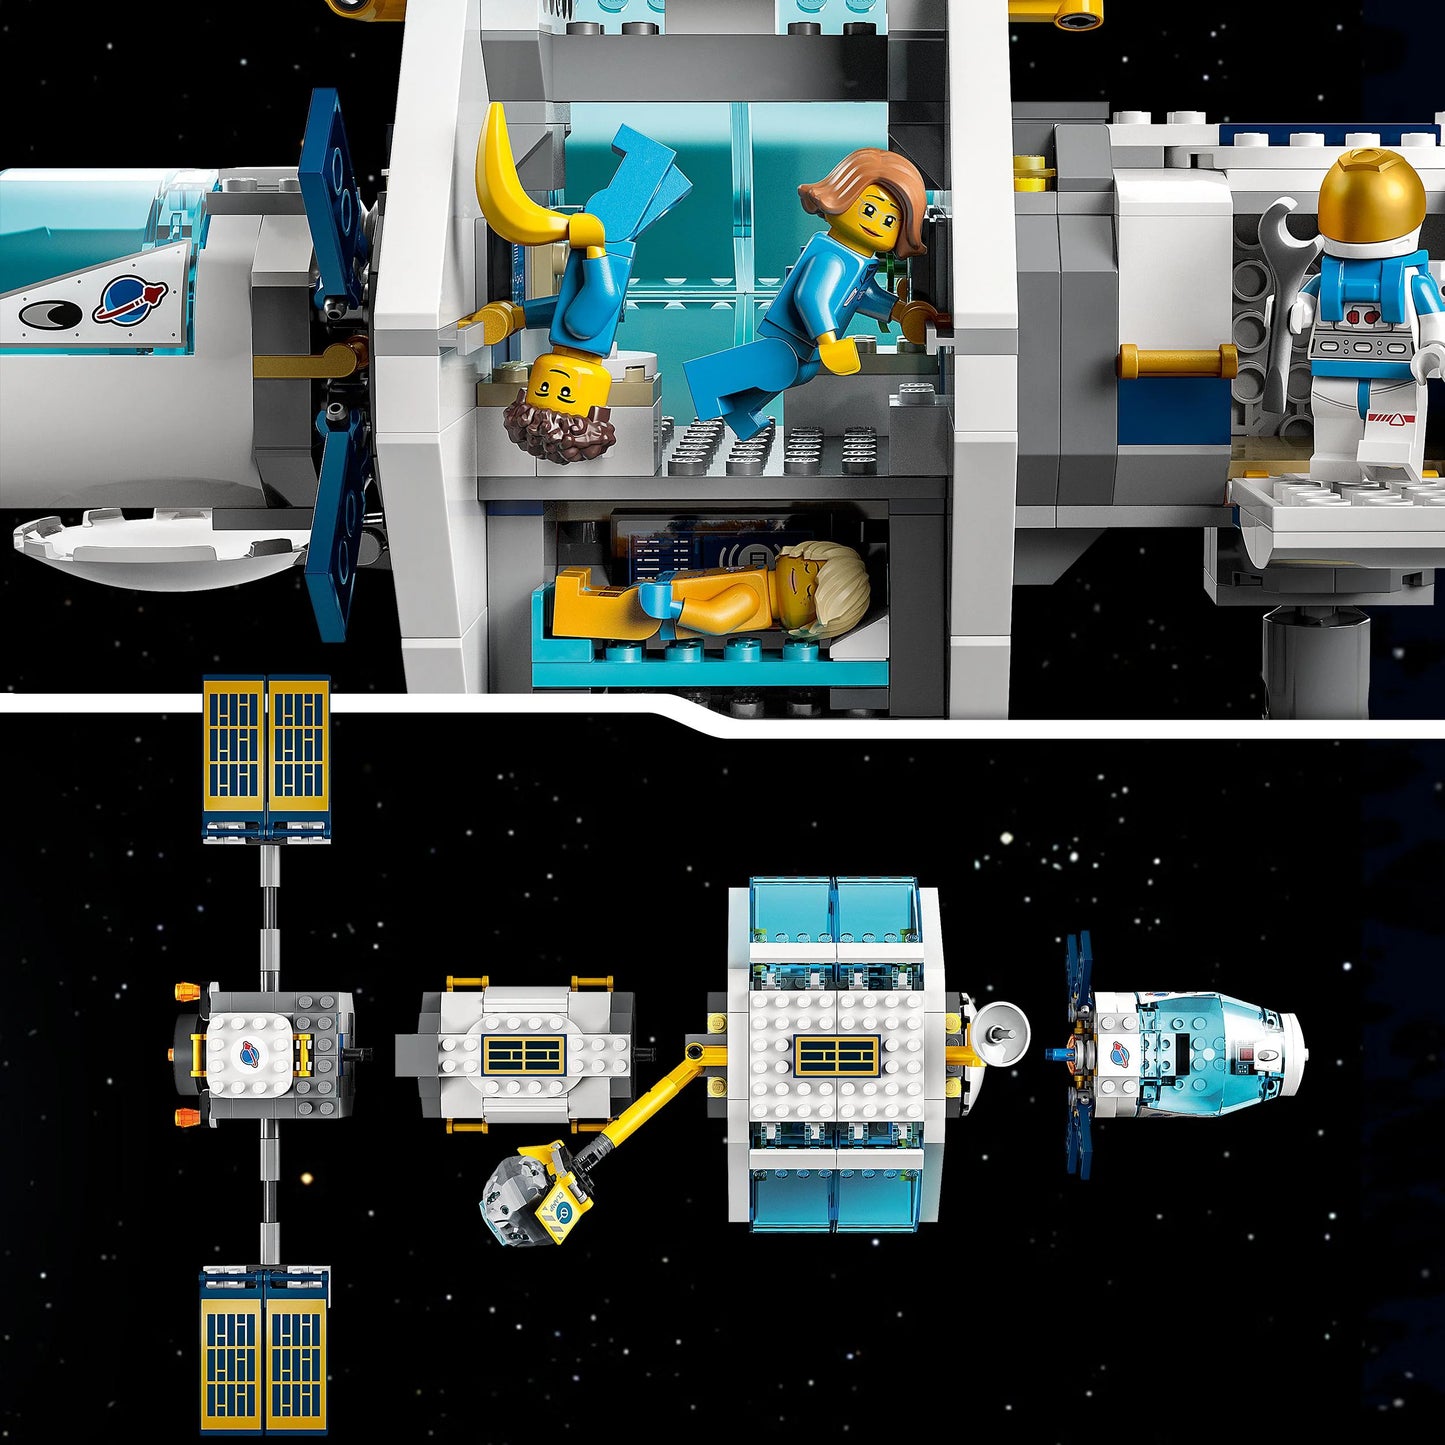 Space station on the moon - LEGO City